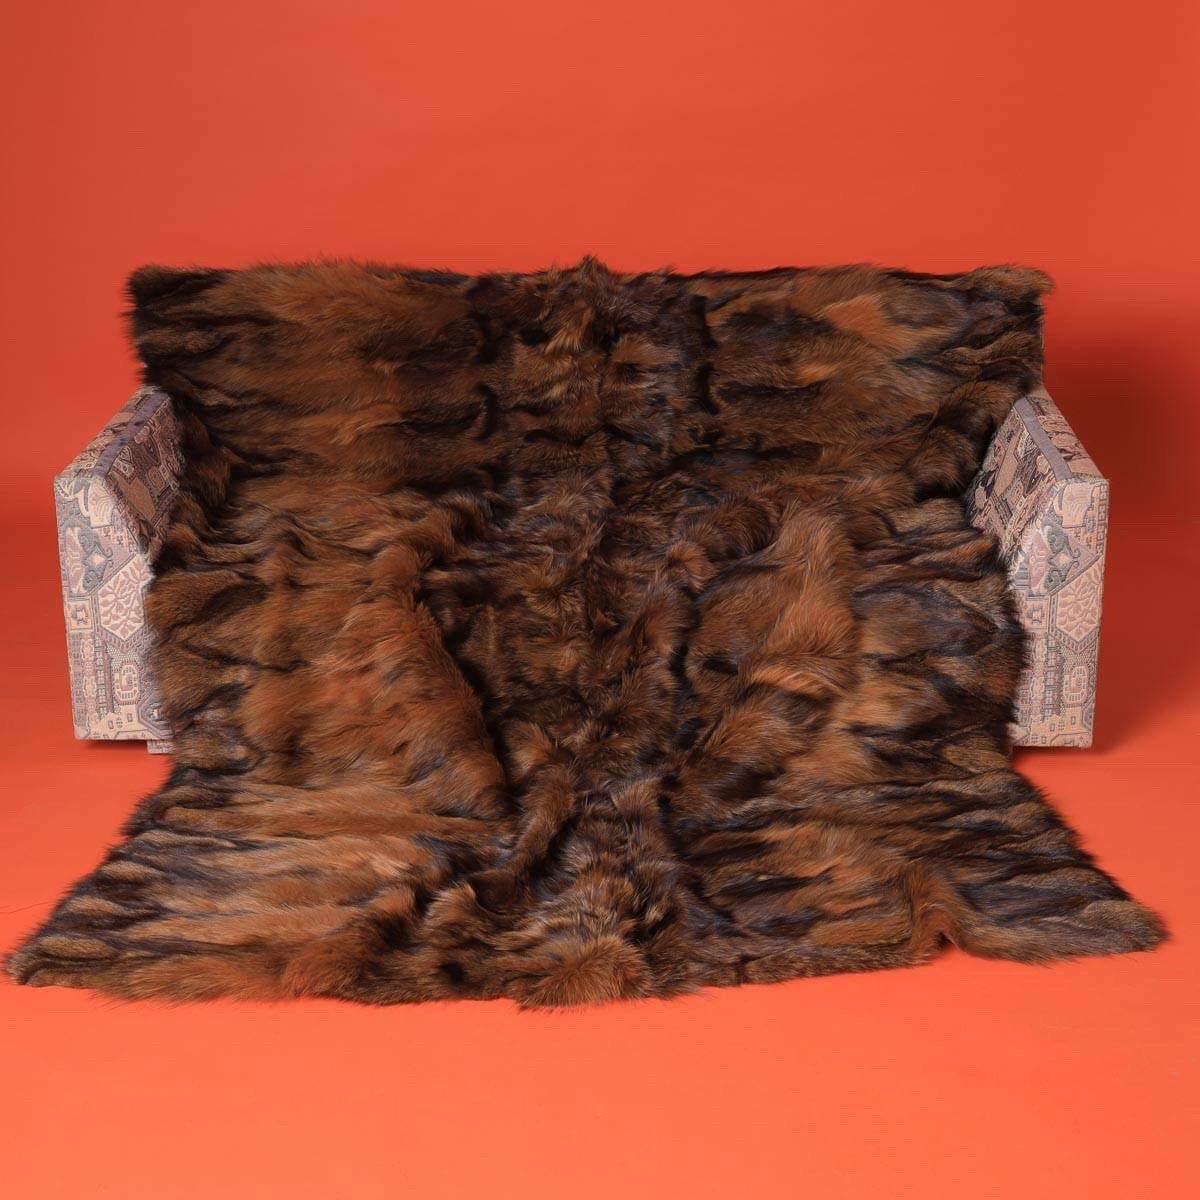 Sold at Auction: Plush, Super soft, Lightweight Queen Size Blanket